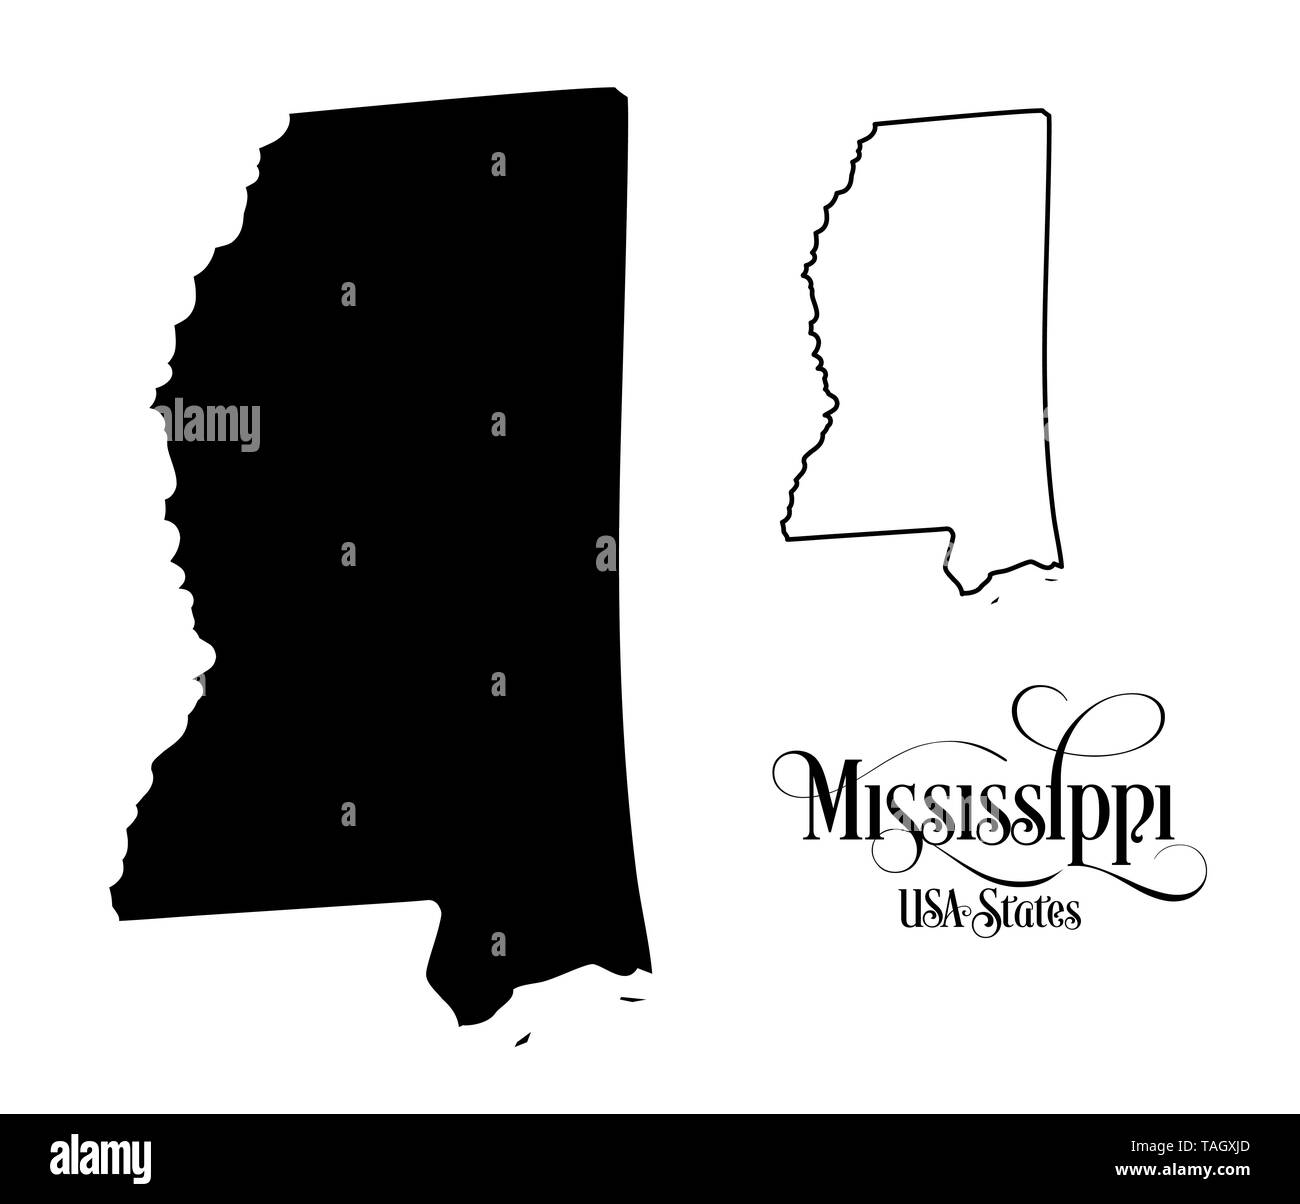 Map of The United States of America (USA) State of Mississippi - Illustration on White Background. Stock Photo